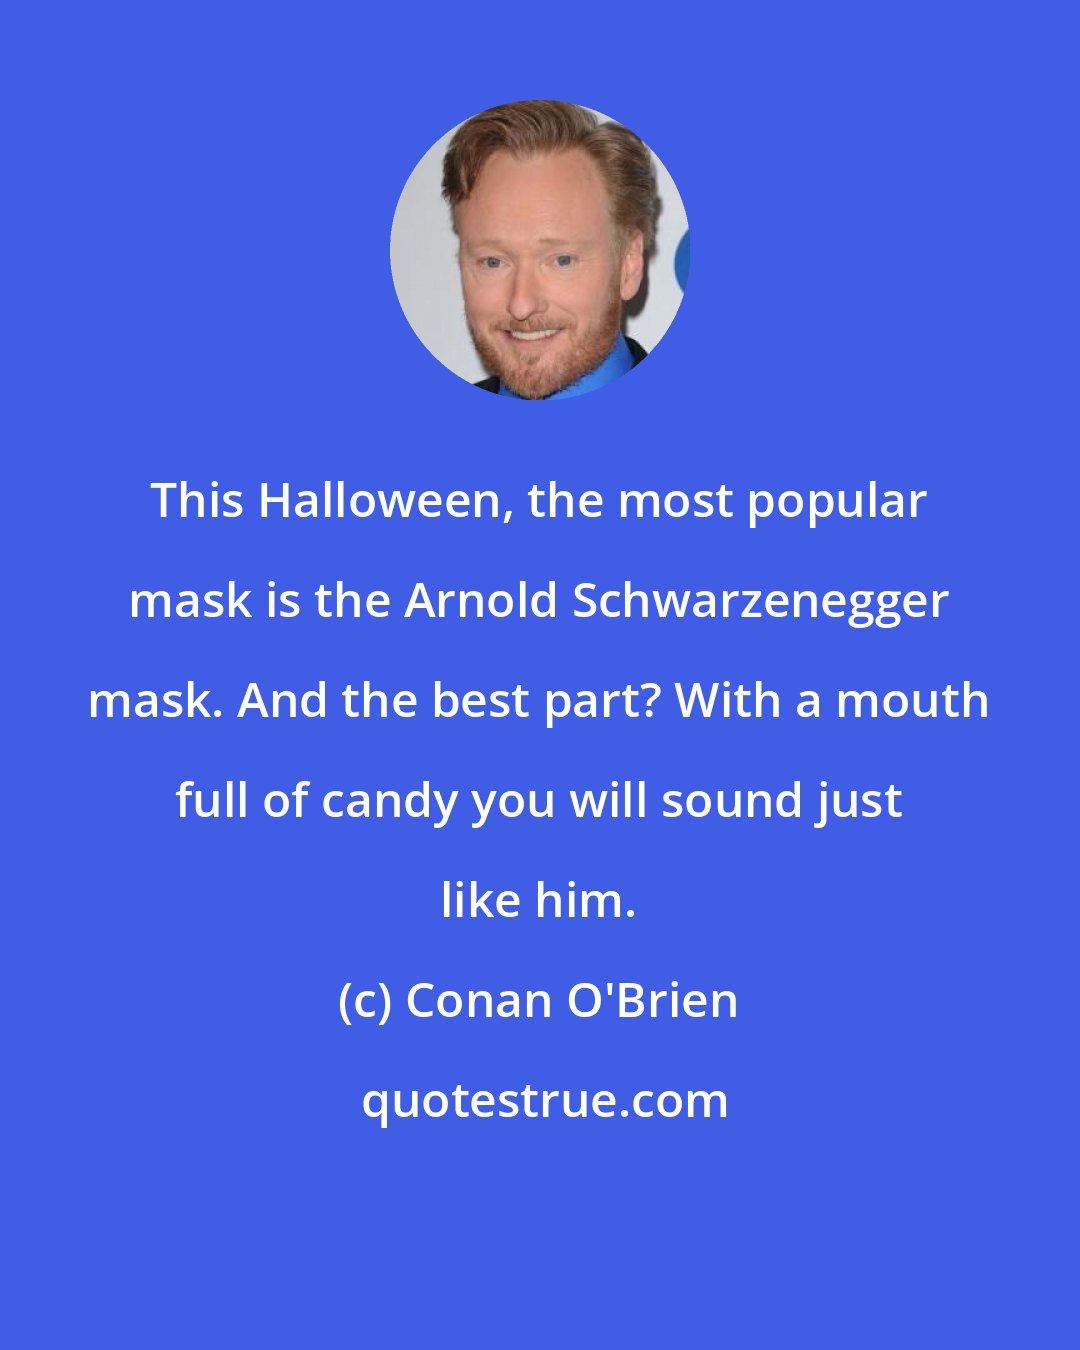 Conan O'Brien: This Halloween, the most popular mask is the Arnold Schwarzenegger mask. And the best part? With a mouth full of candy you will sound just like him.